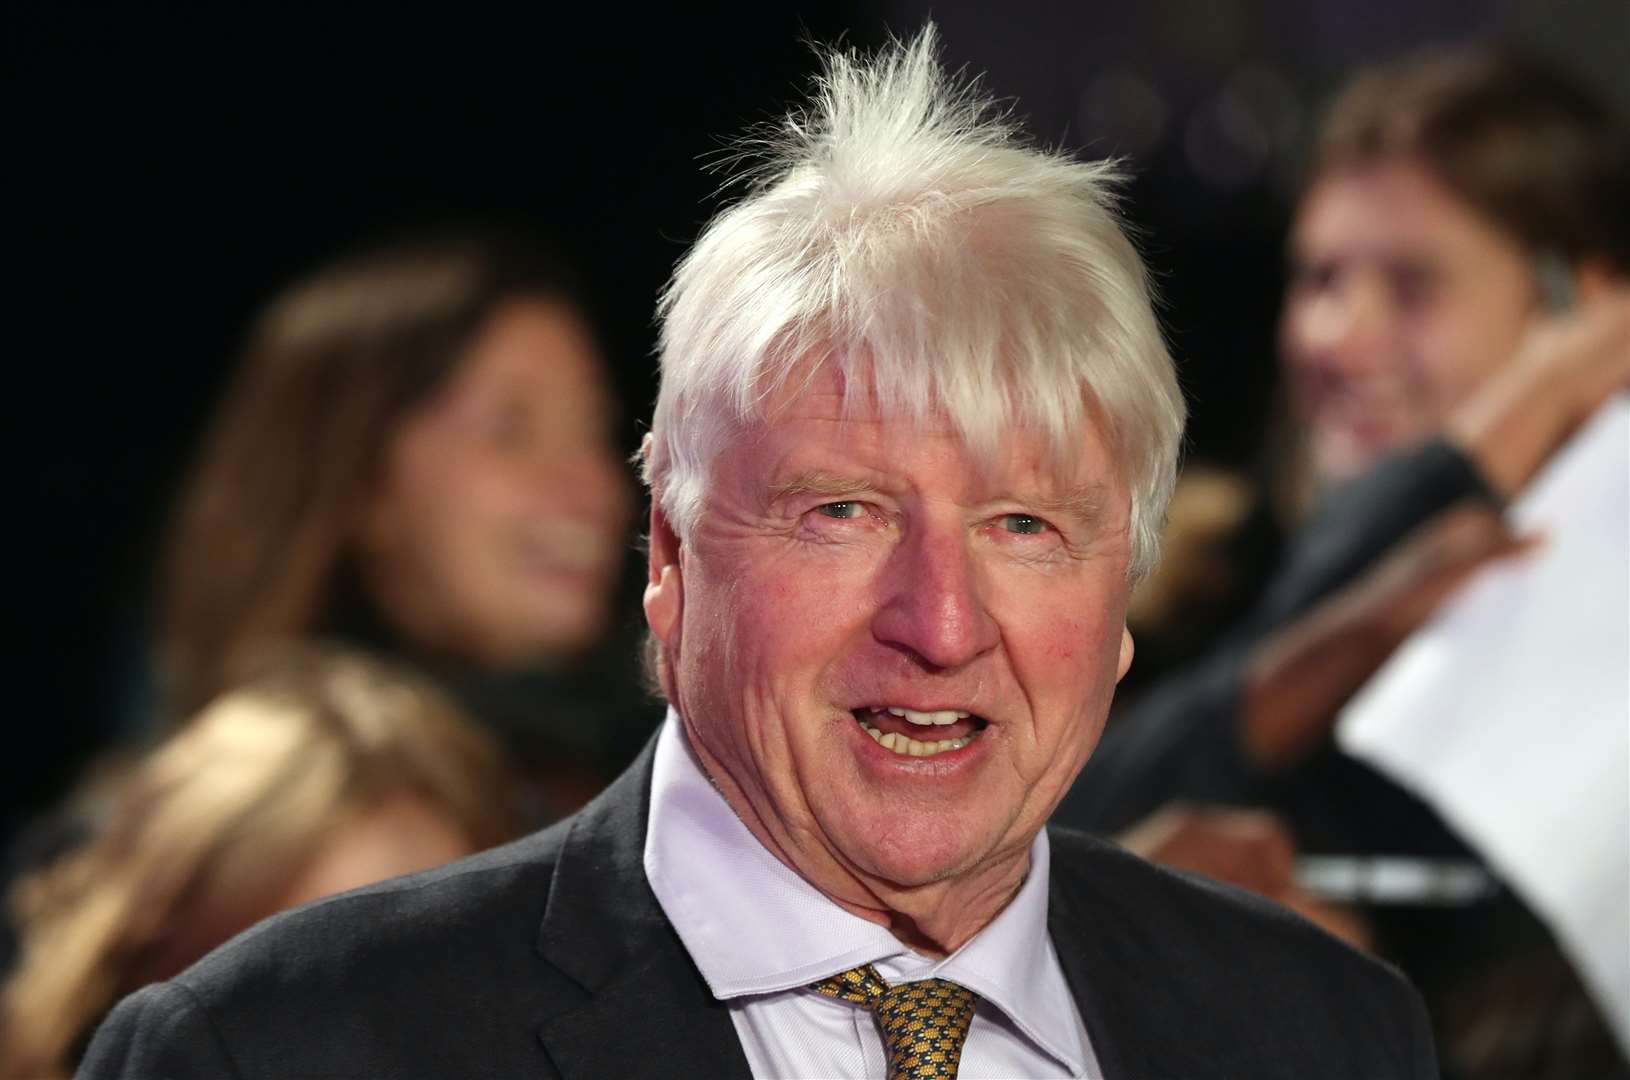 PM’s father Stanley Johnson says UK on ‘right track’ over Covid-19